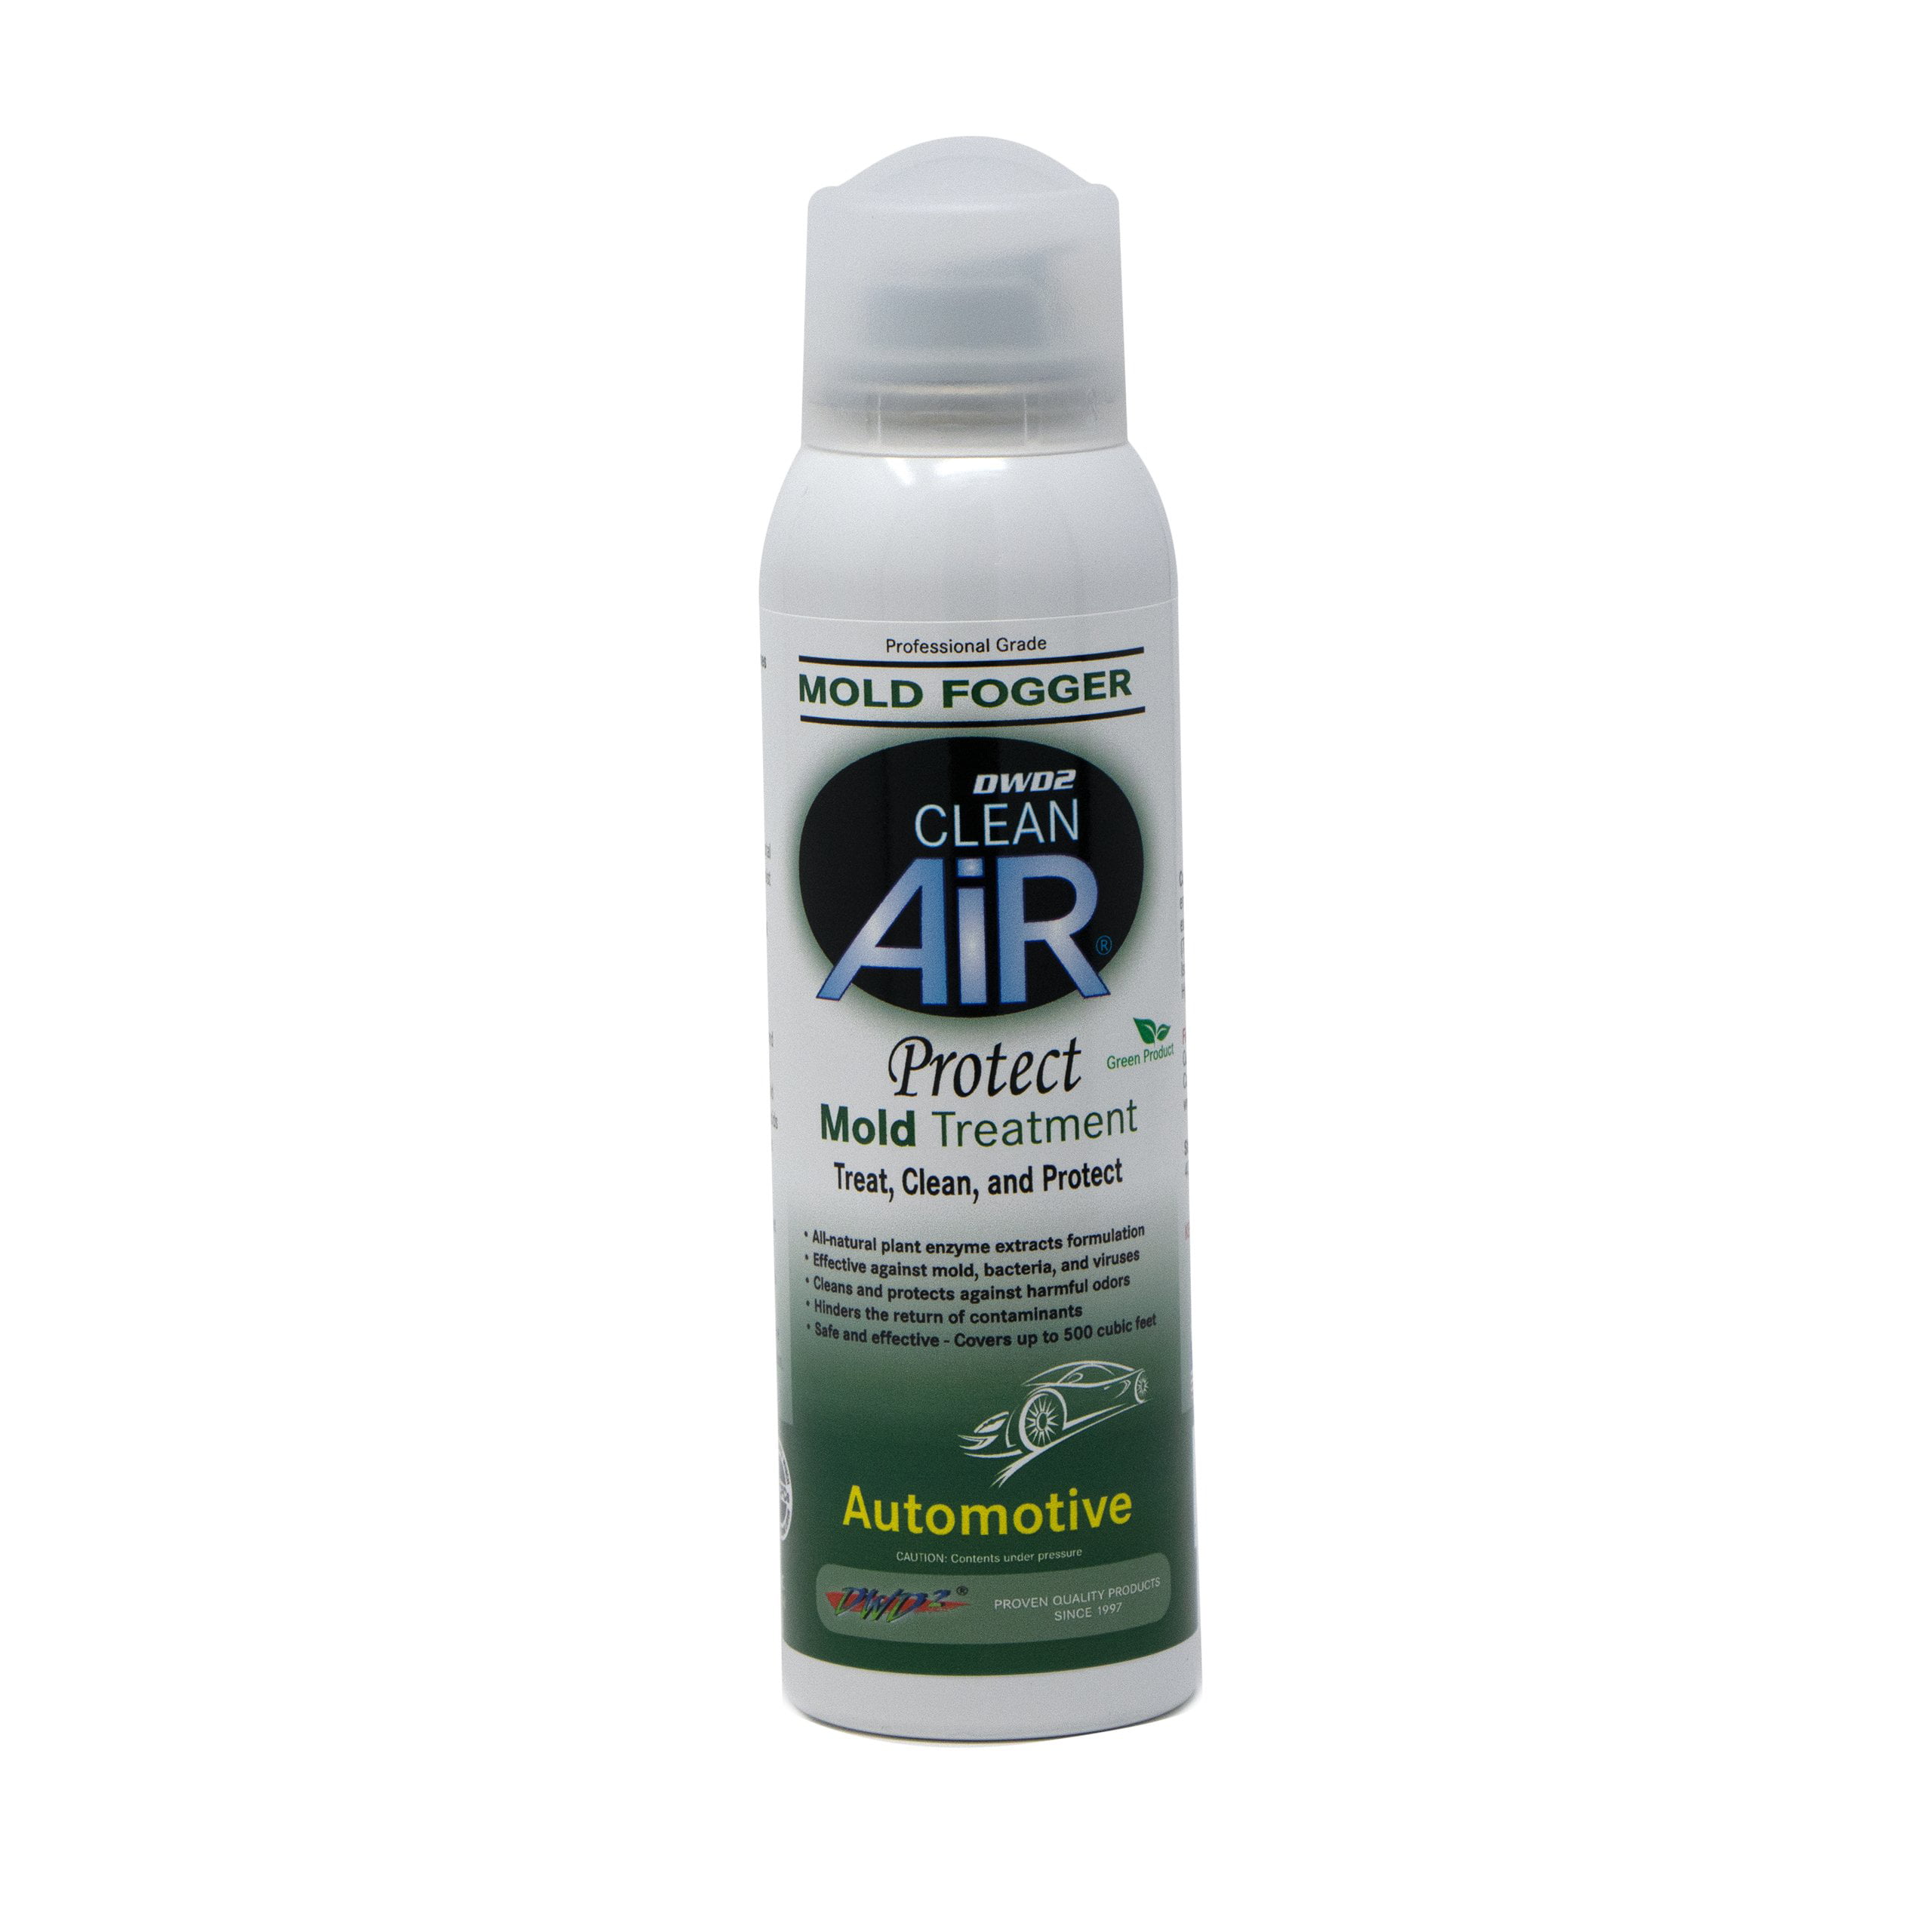 VOS145.985: PLASTIC CLEANER AND ANTI-STATIC AEROSOL - 13.5 OZ. - CAR SYSTEMS